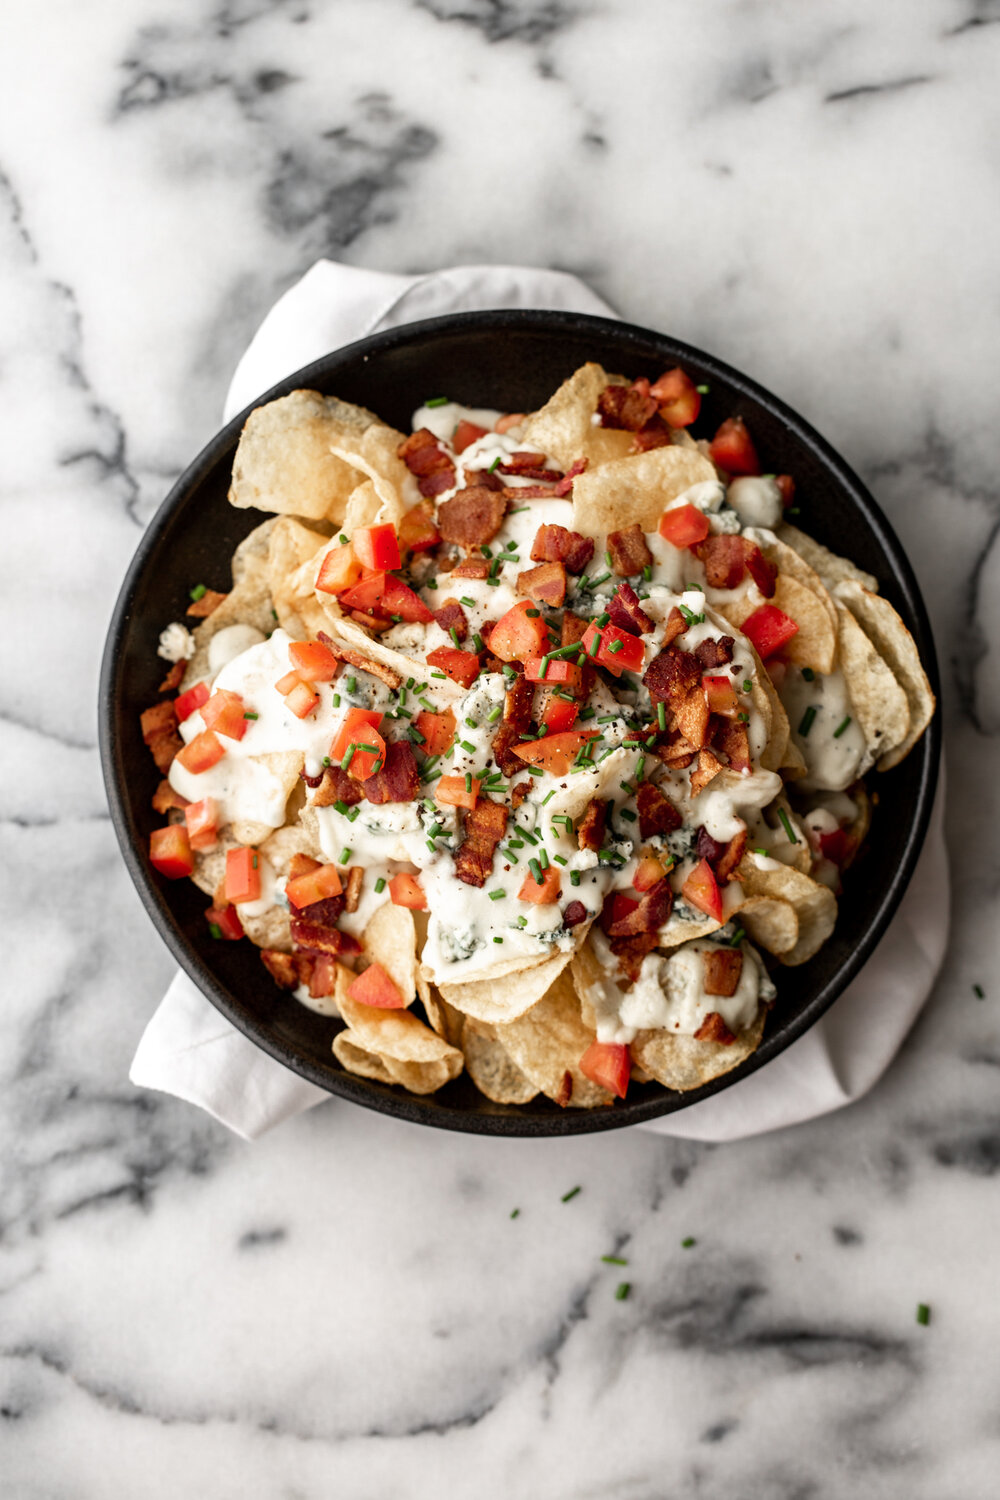 homemade potato chips with blue cheese fondue, bacon and tomatoes 